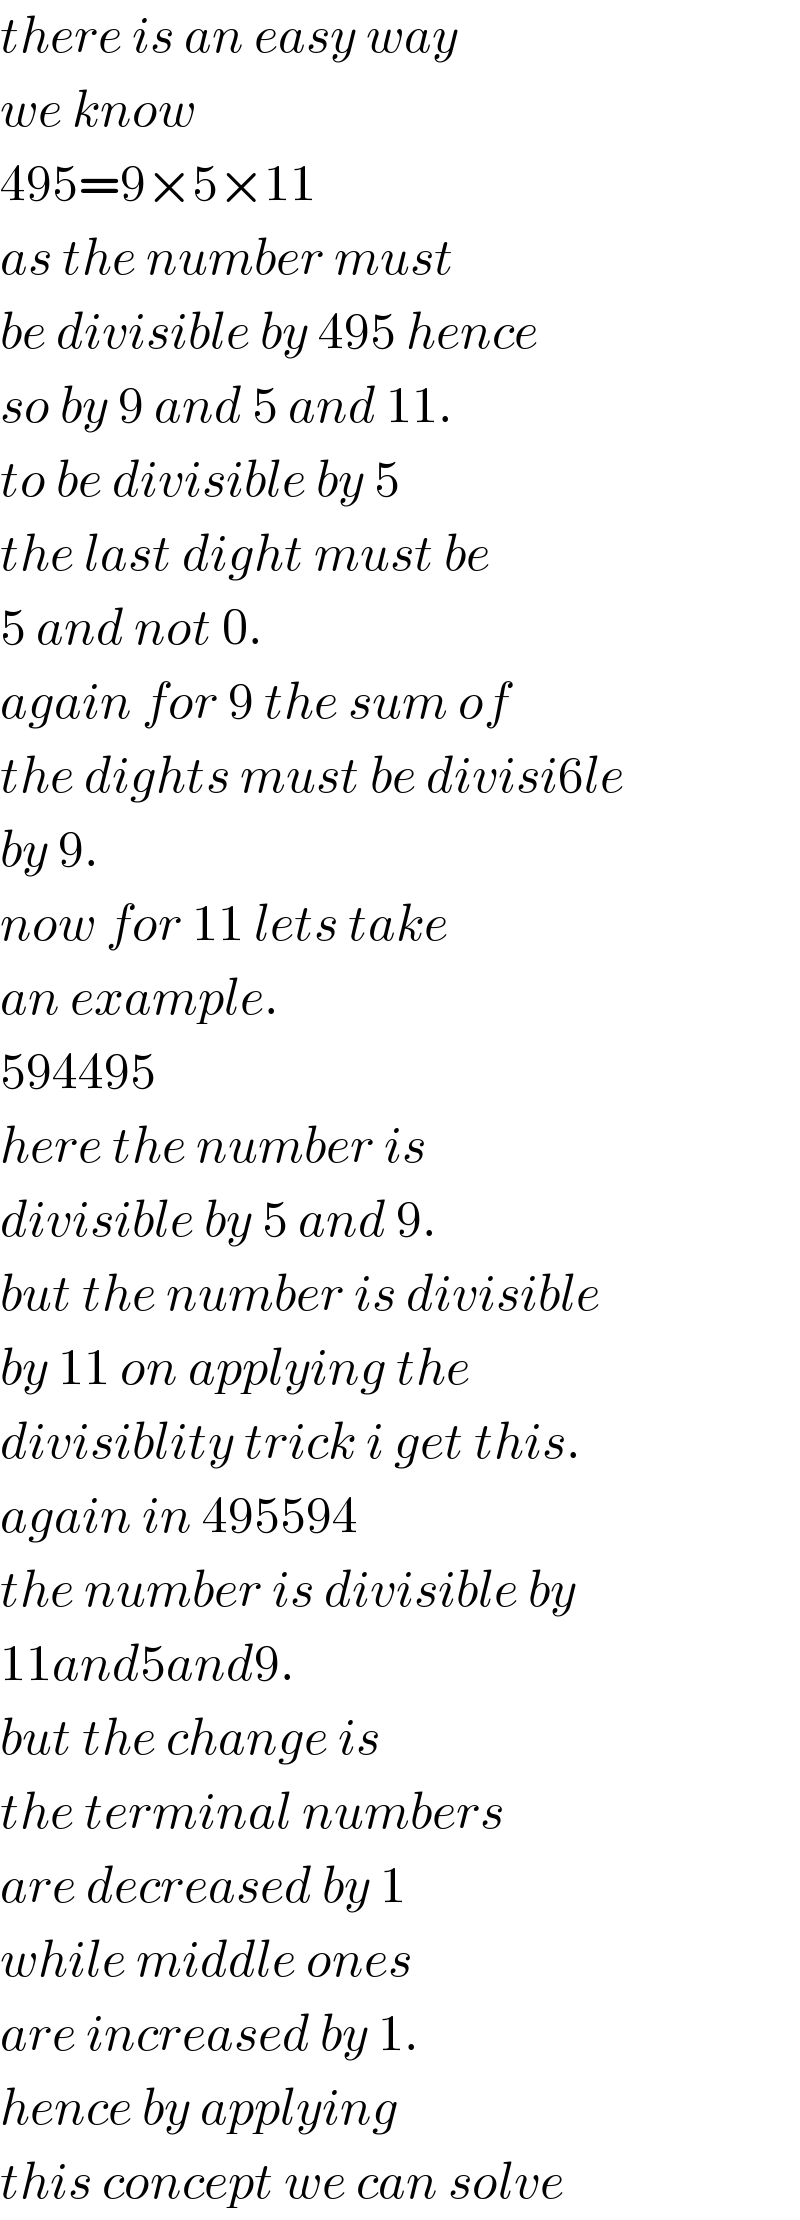 there is an easy way  we know   495=9×5×11  as the number must  be divisible by 495 hence  so by 9 and 5 and 11.  to be divisible by 5   the last dight must be  5 and not 0.  again for 9 the sum of  the dights must be divisi6le  by 9.  now for 11 lets take   an example.  594495   here the number is  divisible by 5 and 9.  but the number is divisible  by 11 on applying the  divisiblity trick i get this.  again in 495594  the number is divisible by  11and5and9.  but the change is   the terminal numbers  are decreased by 1   while middle ones   are increased by 1.  hence by applying  this concept we can solve  